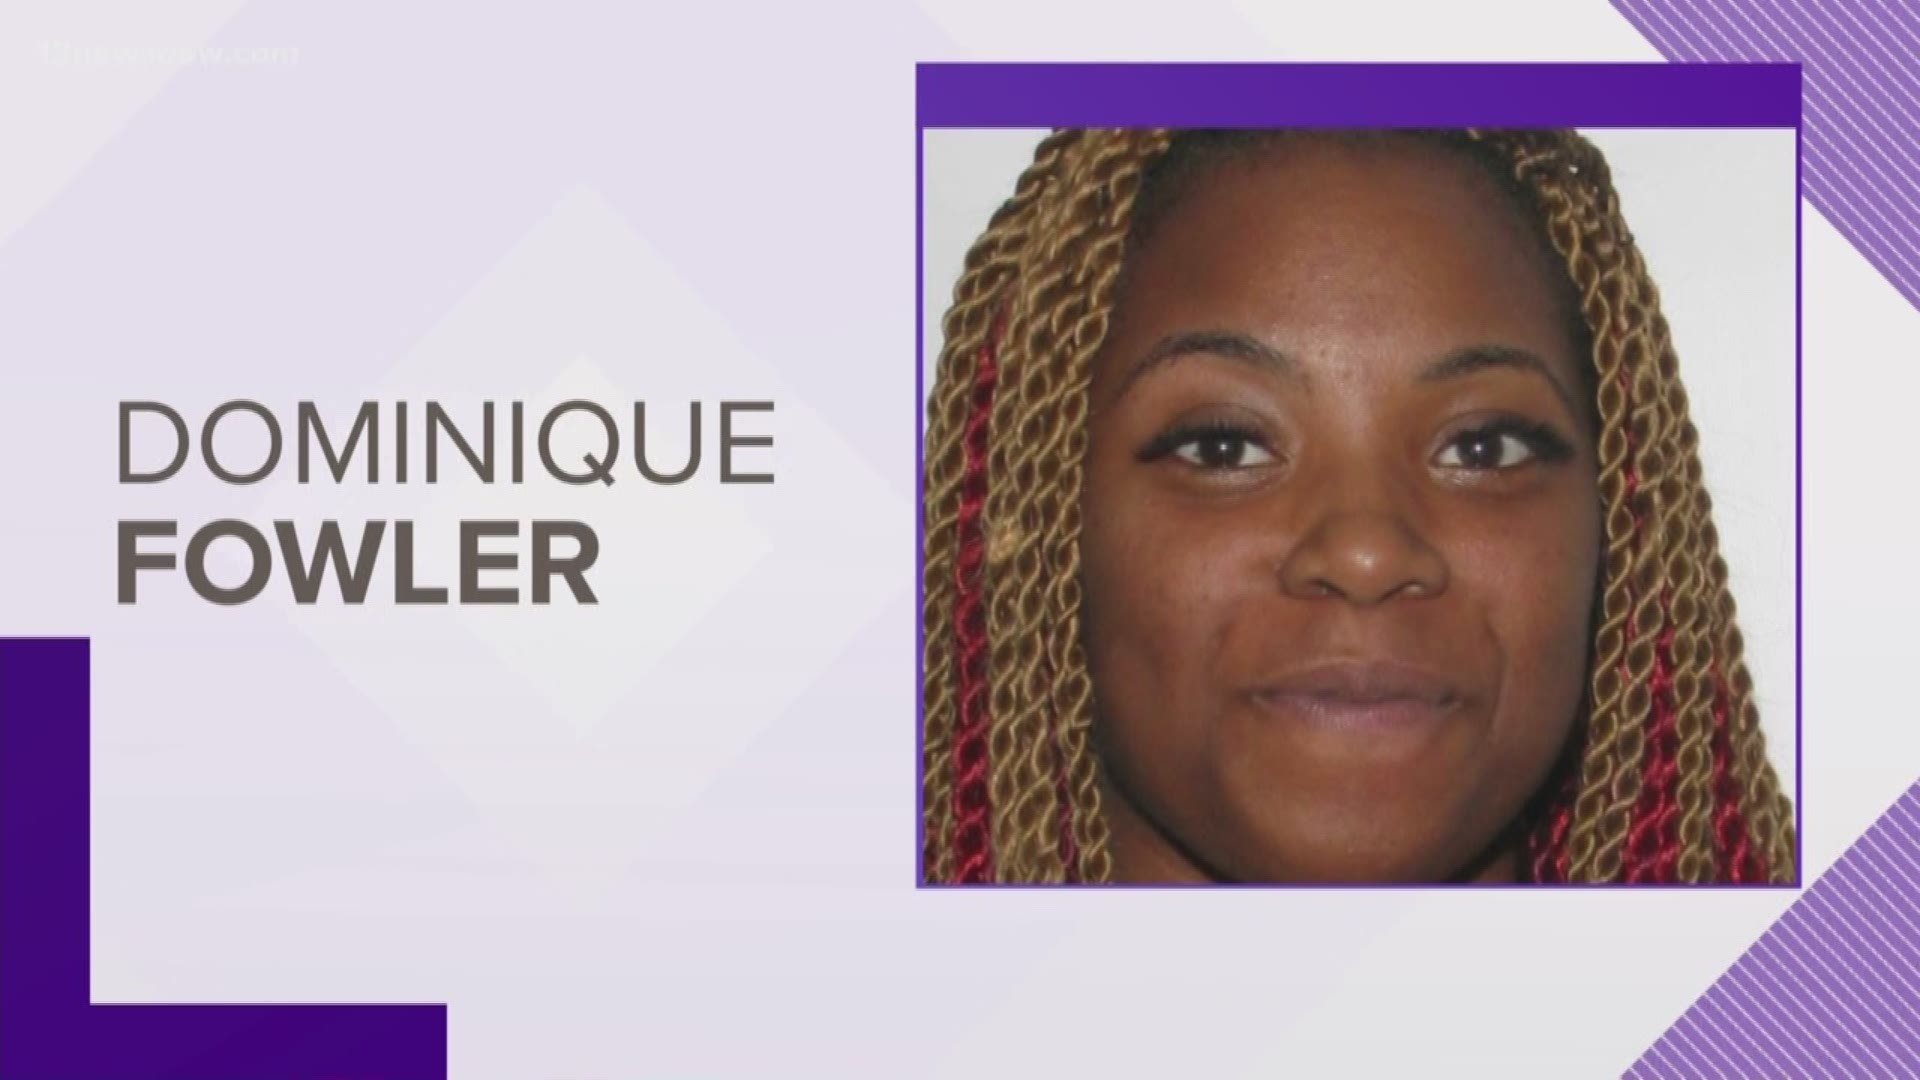 Dominique Fowler, also known as Peaches, is wanted for a 2017 attempted murder in Portsmouth. Her story is being taken to the national level on Investigation Discovery's "In Pursuit."